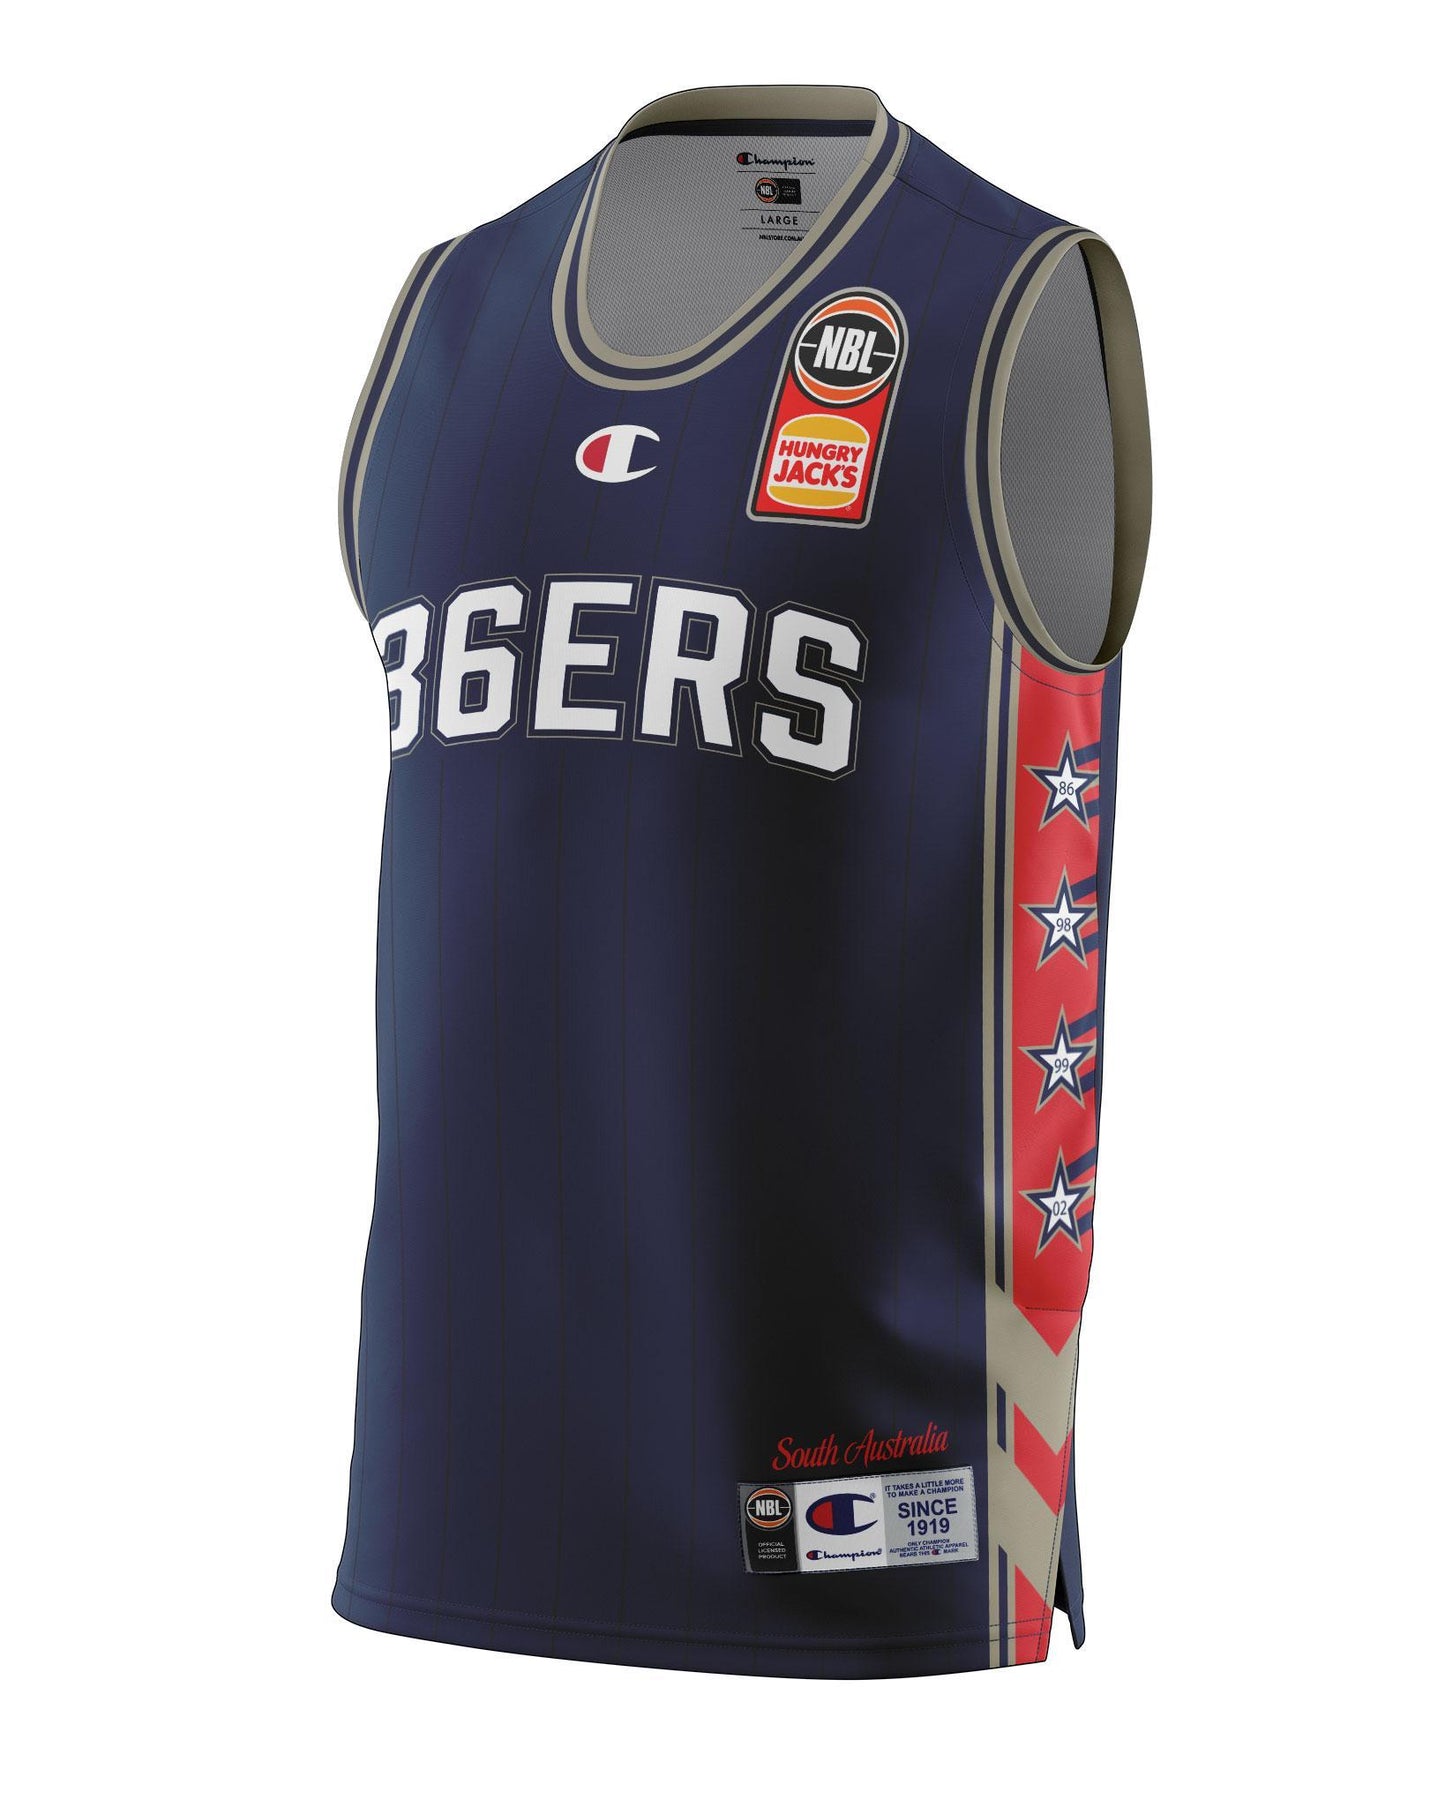 Adelaide 36ers 2021/22 Authentic Adult Home Jersey